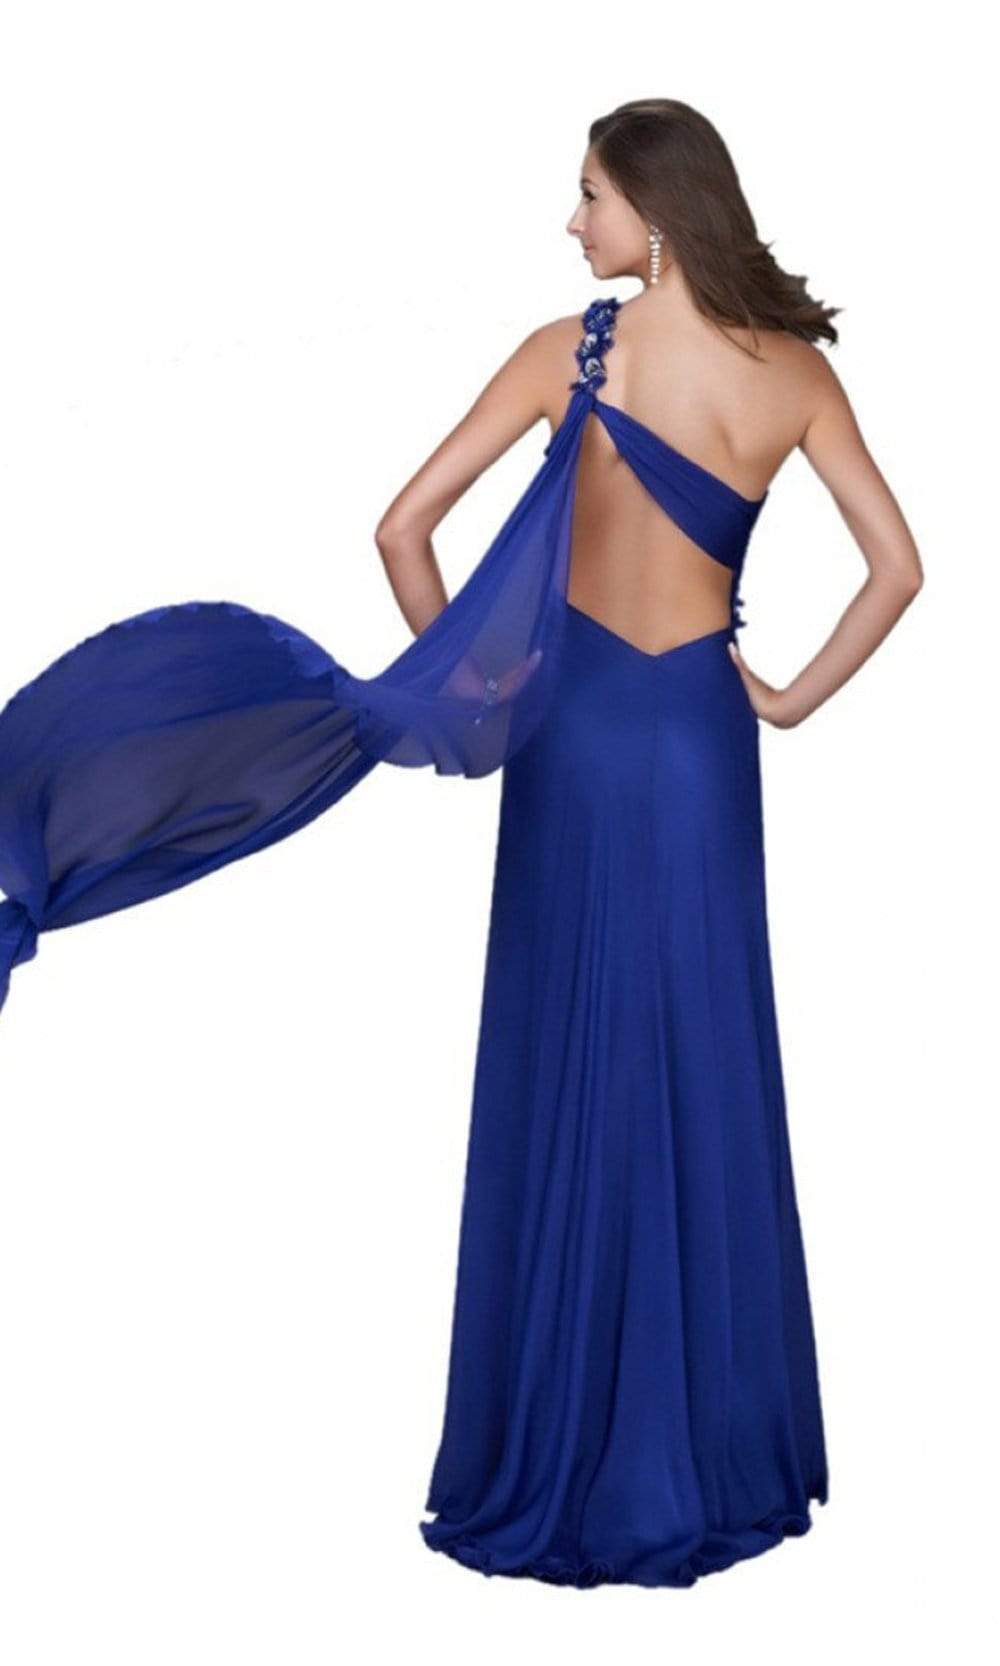 La Femme - 16659 One Shoulder Braded Strap Sweetheart Evening Gown Special Occasion Dress